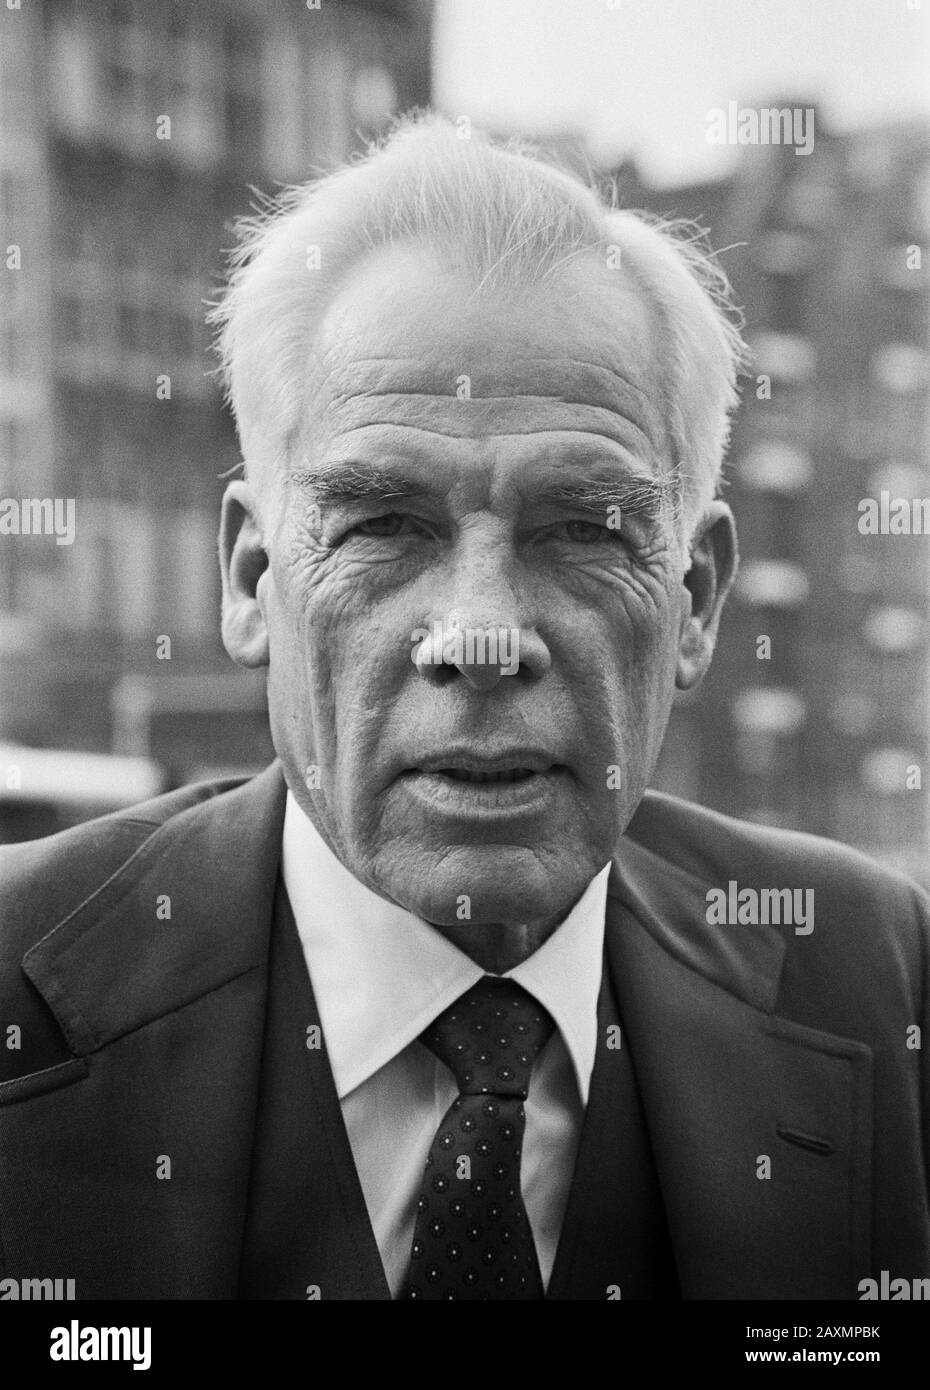 Lee Marvin Ad Amsterdam Foto Stock